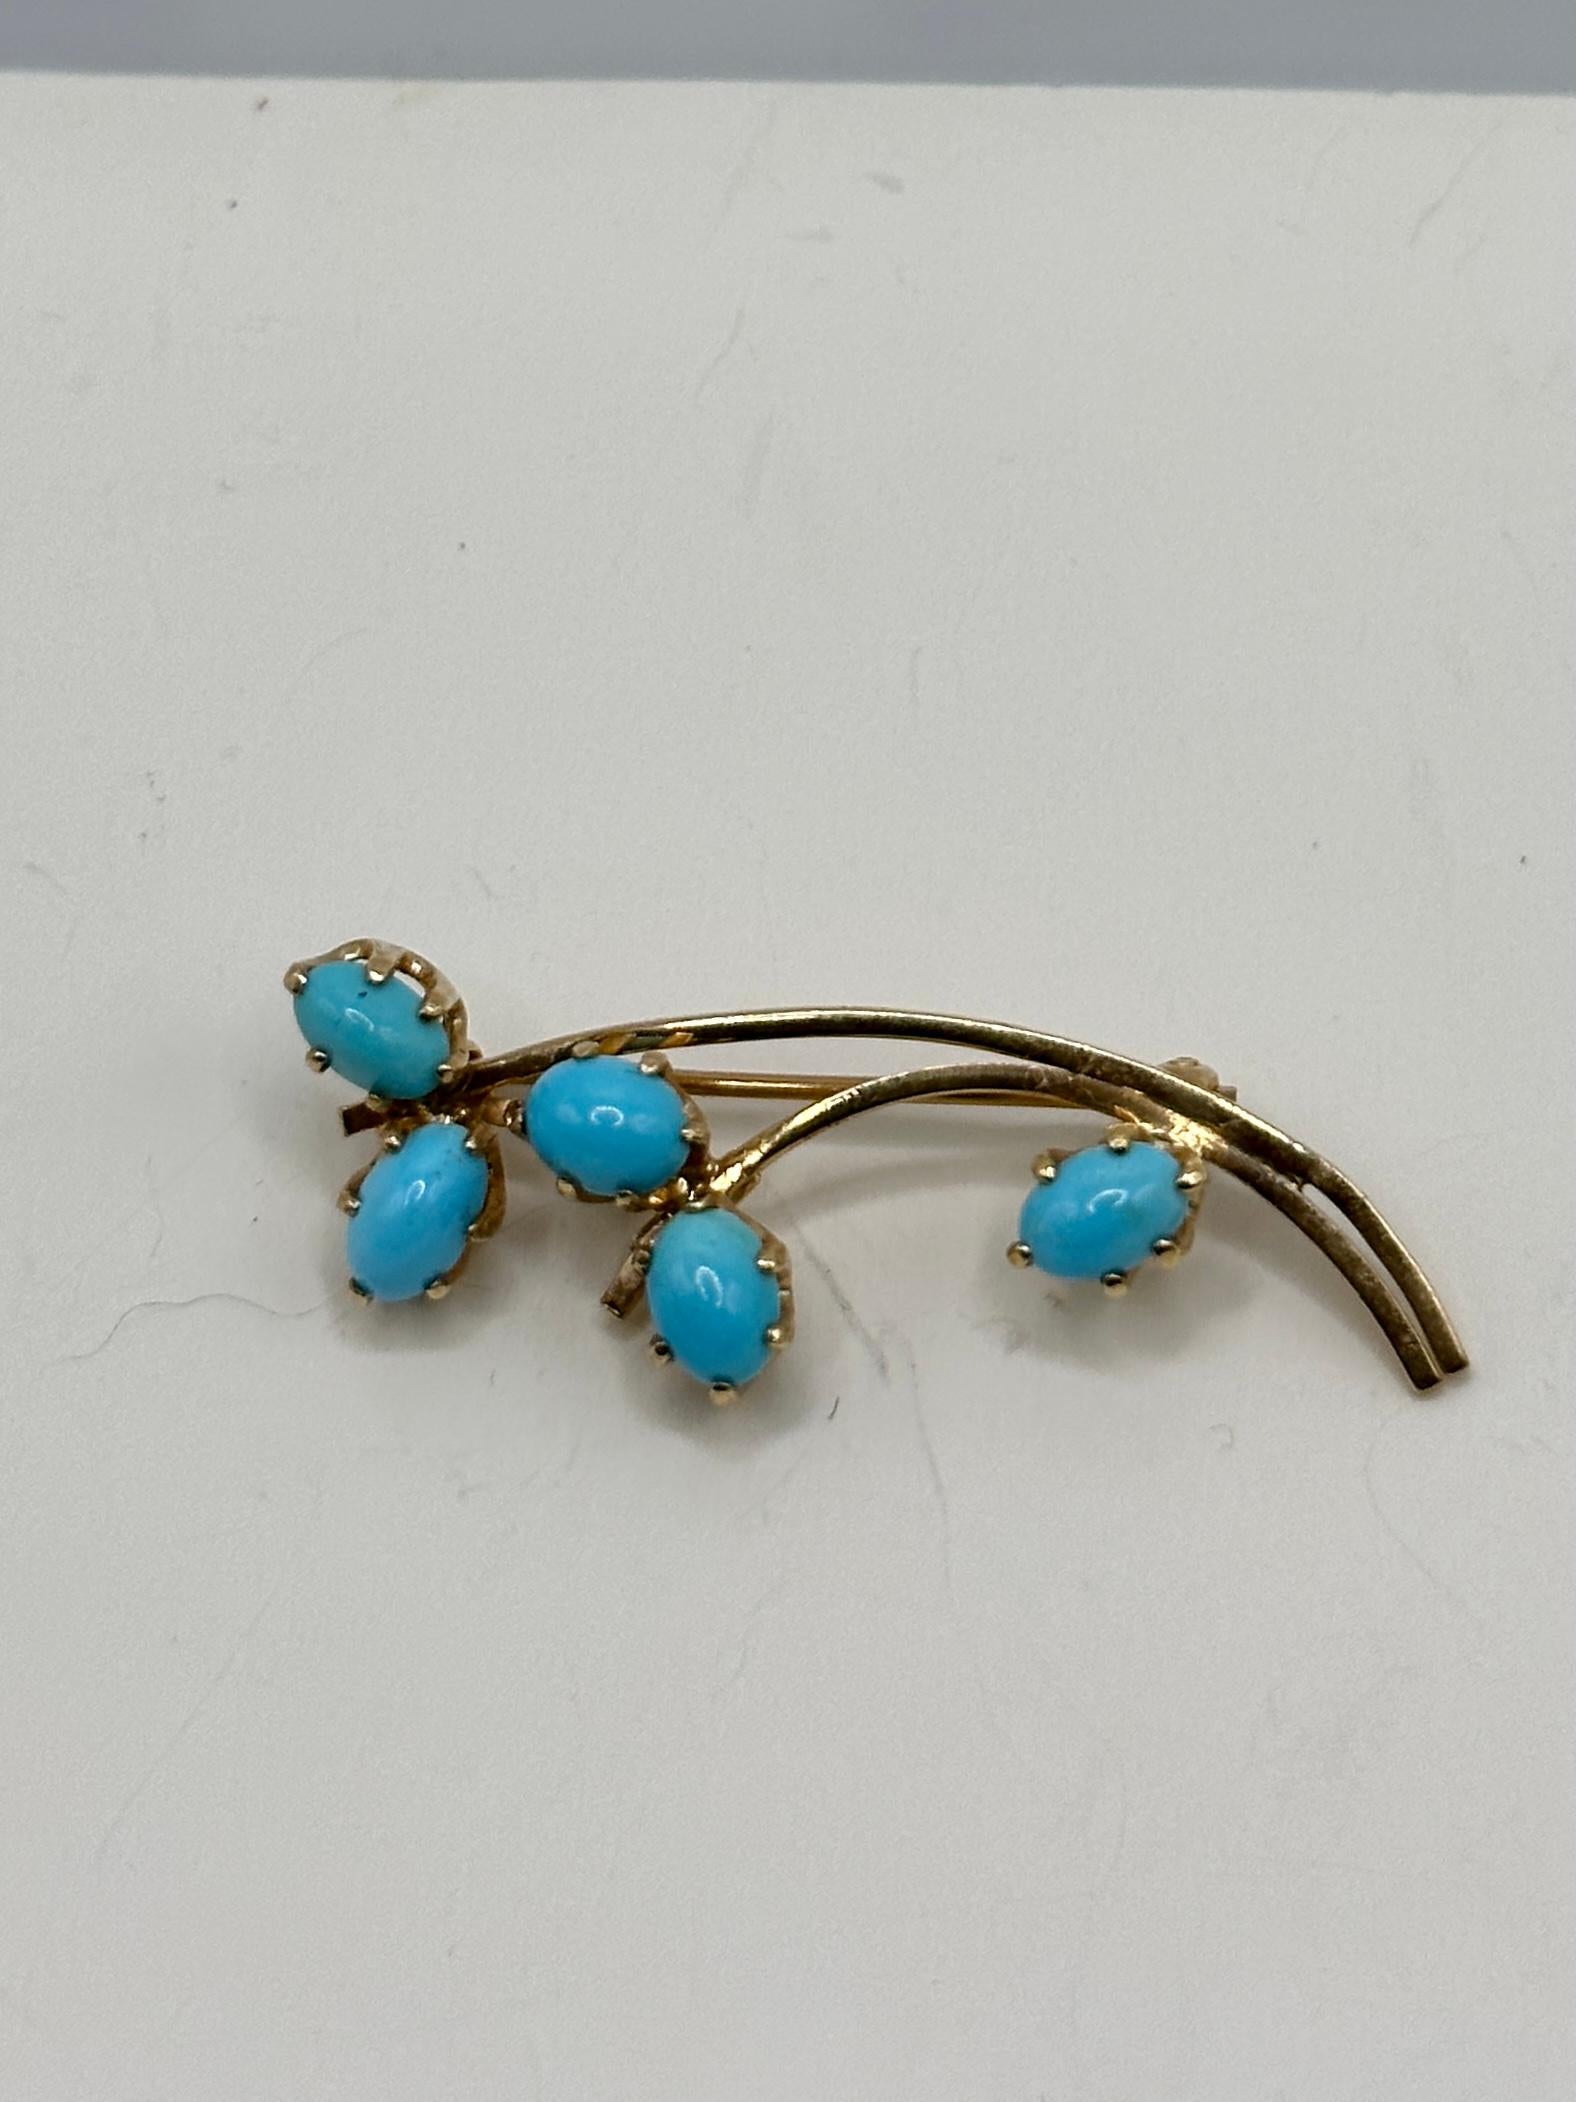 Persian Turquoise 14Karat Gold Brooch In Excellent Condition For Sale In Summerland, CA